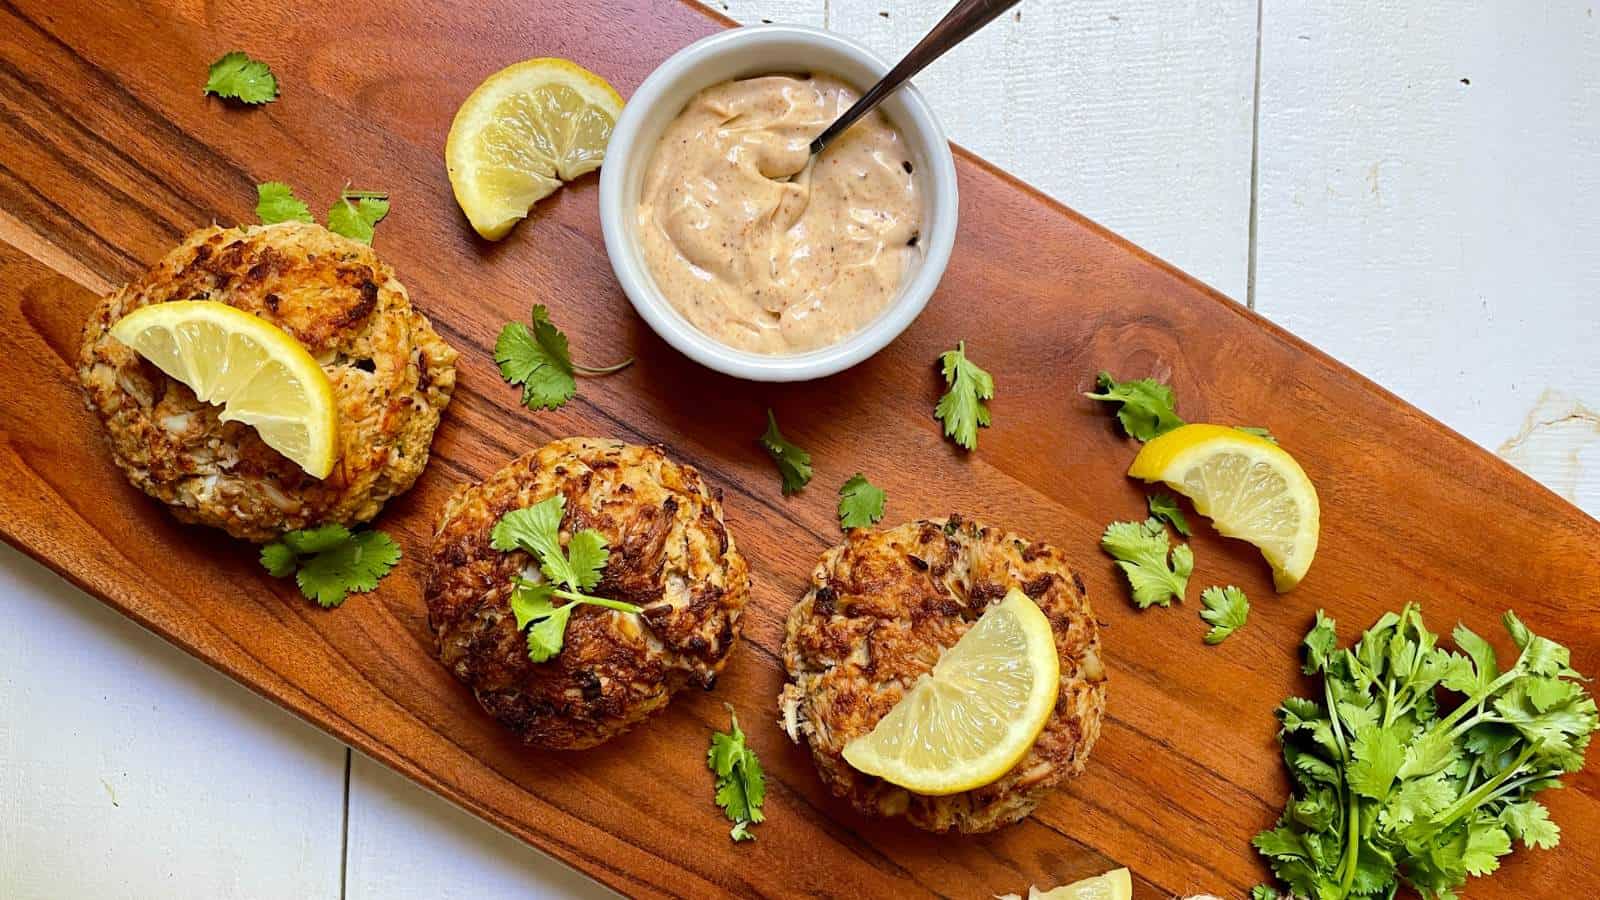 Three crab cakes garnished with lemon wedges and parsley are arranged on a wooden board, accompanied by a small bowl of dipping sauce with a spoon.